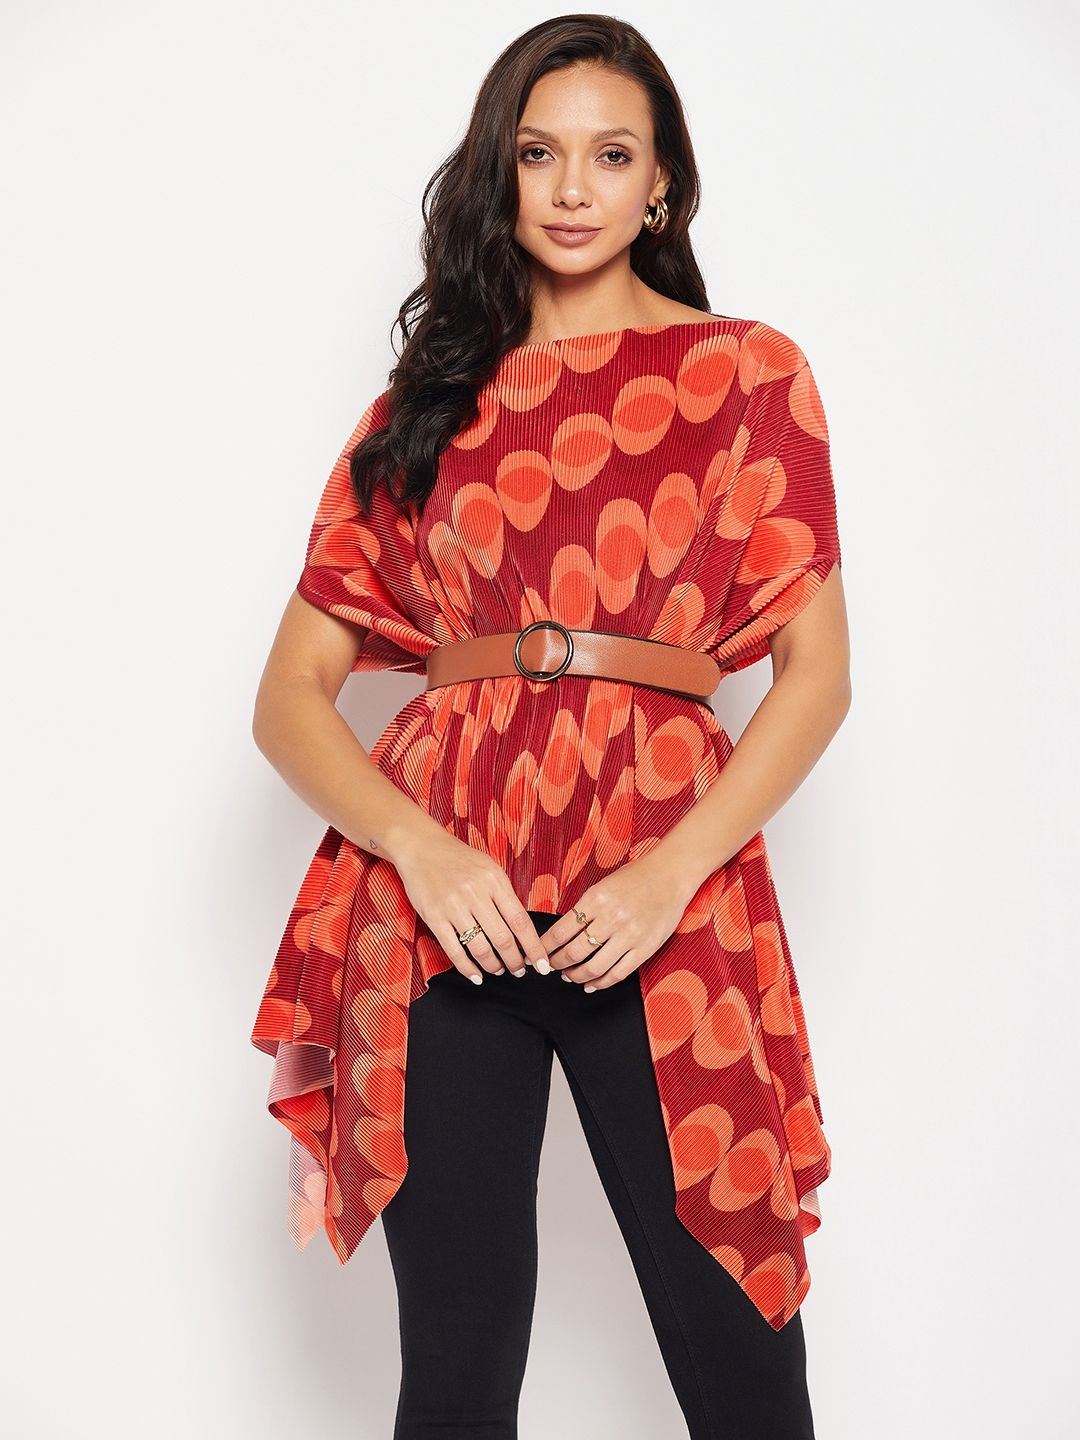 Wear Anyway Pleated Top - Uptownie